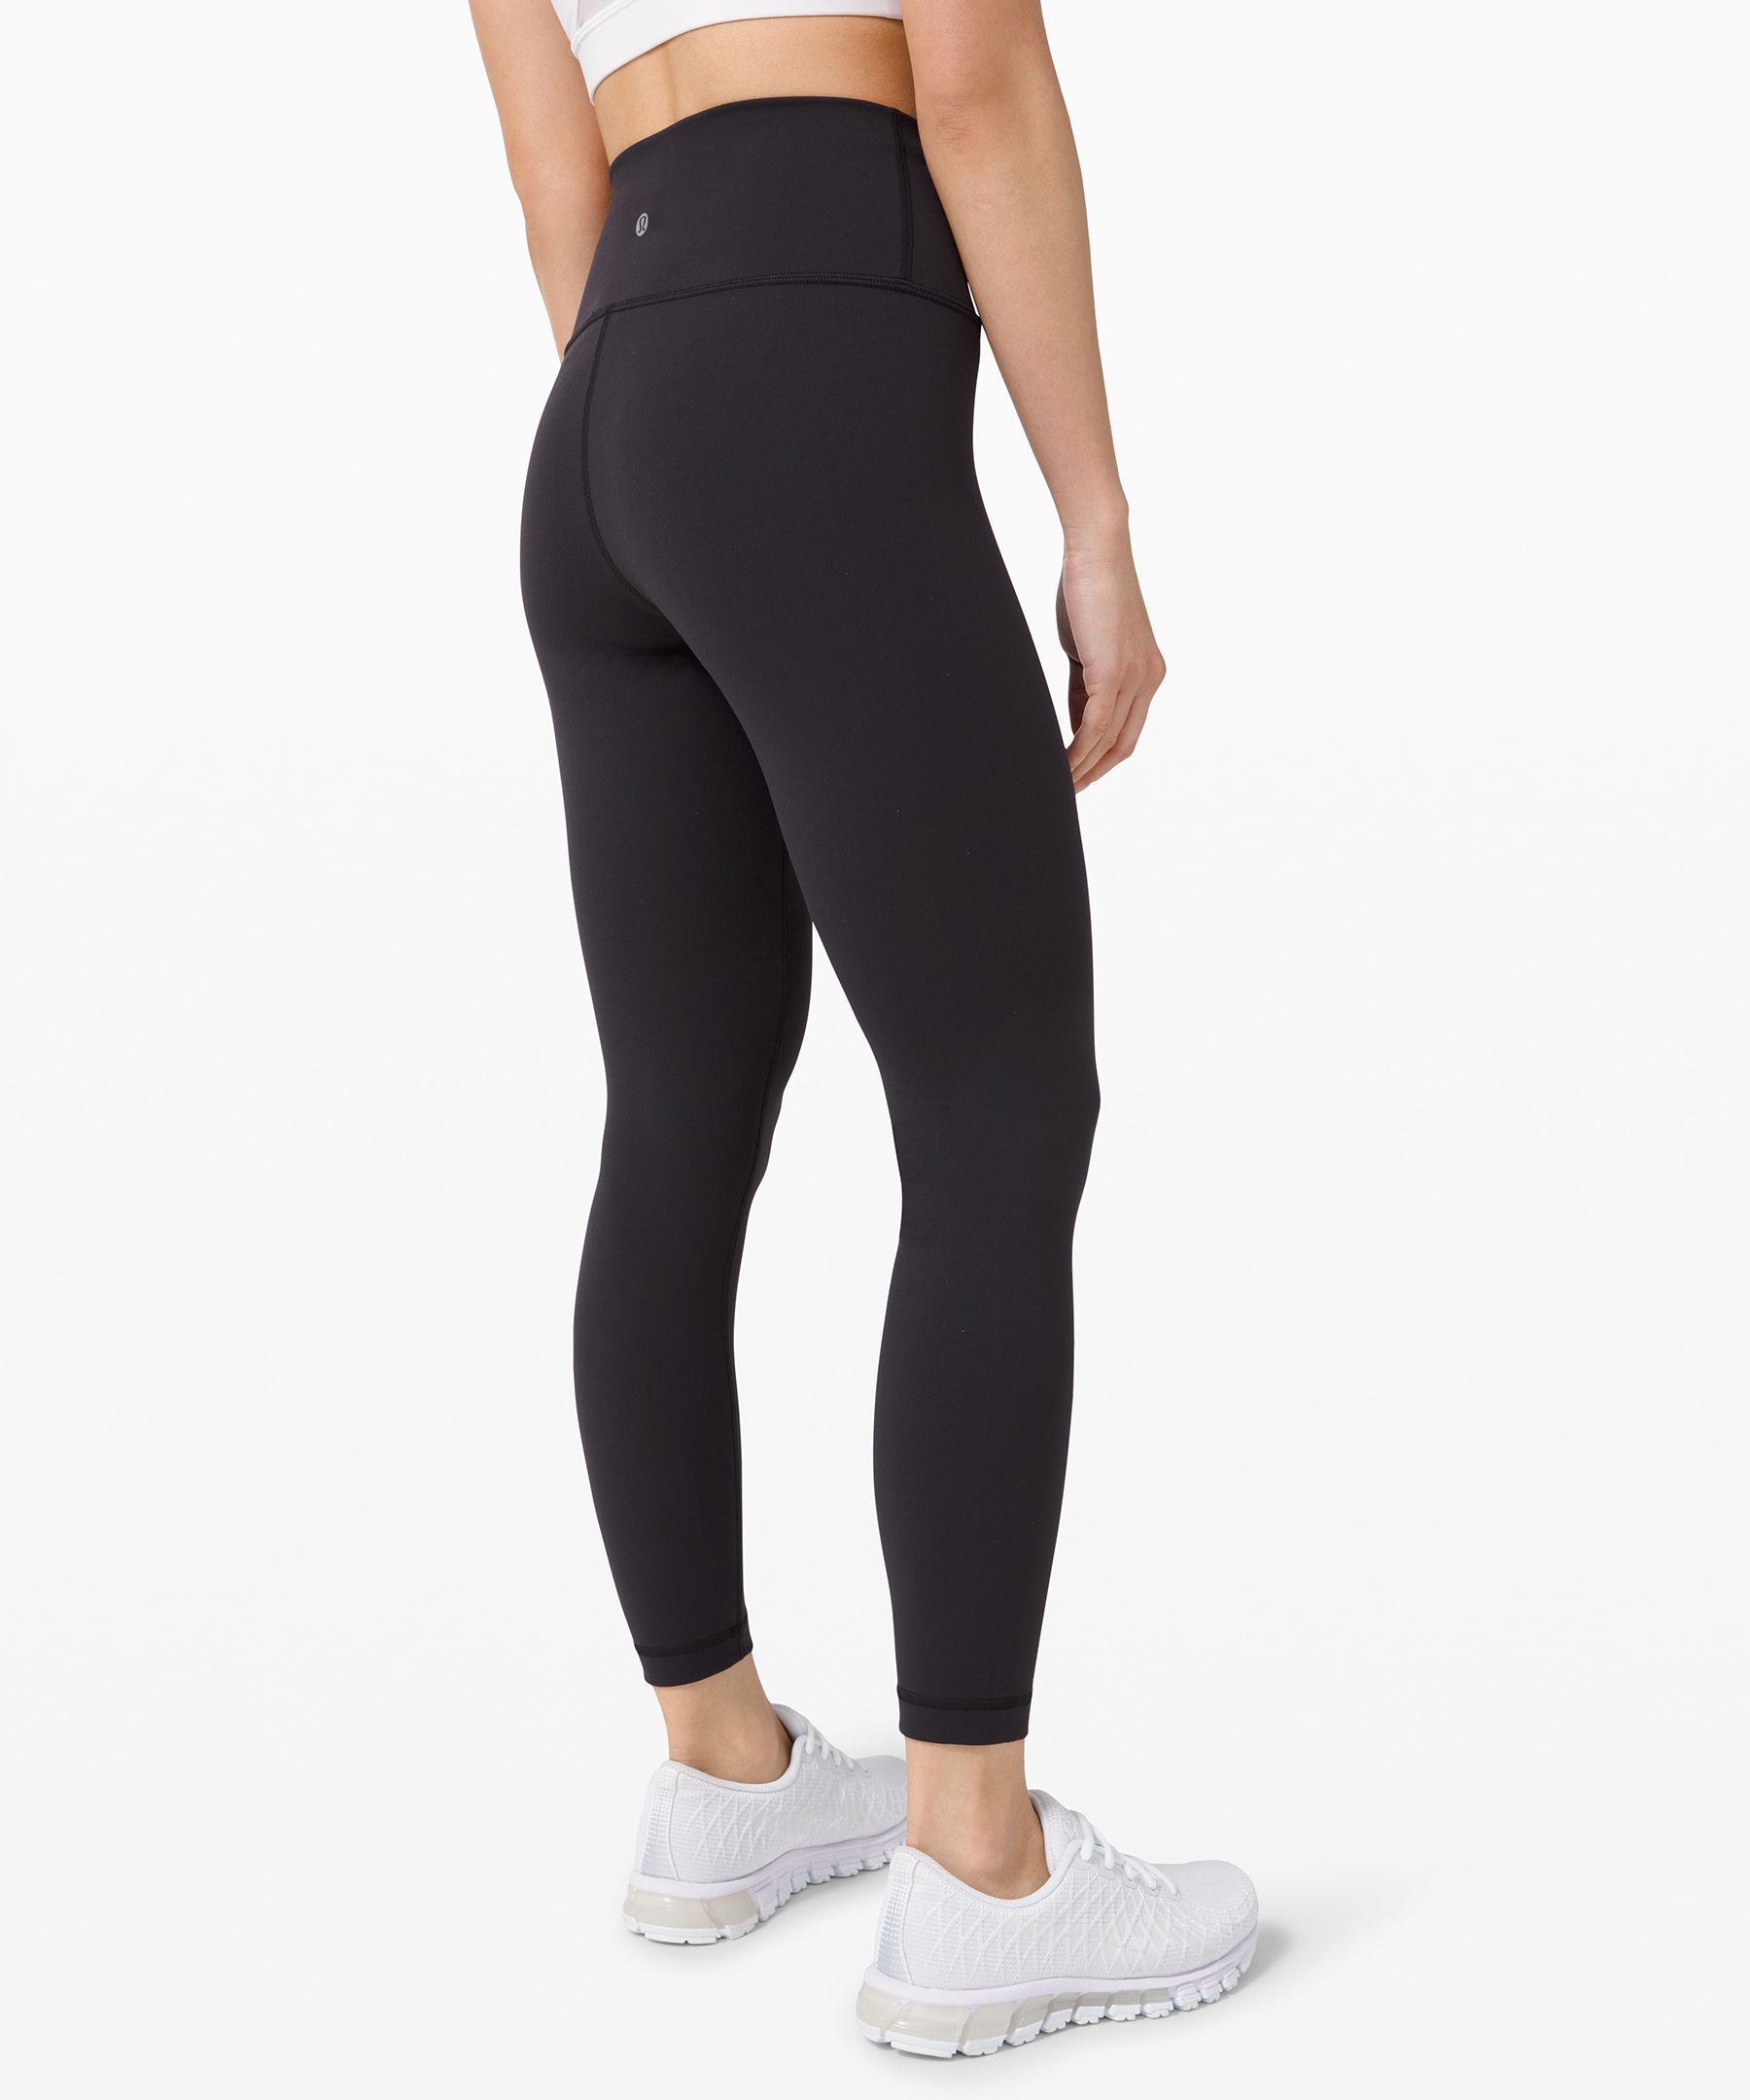 Wunder Train High Rise Tight 24 Asia Fit Lululemon Nz